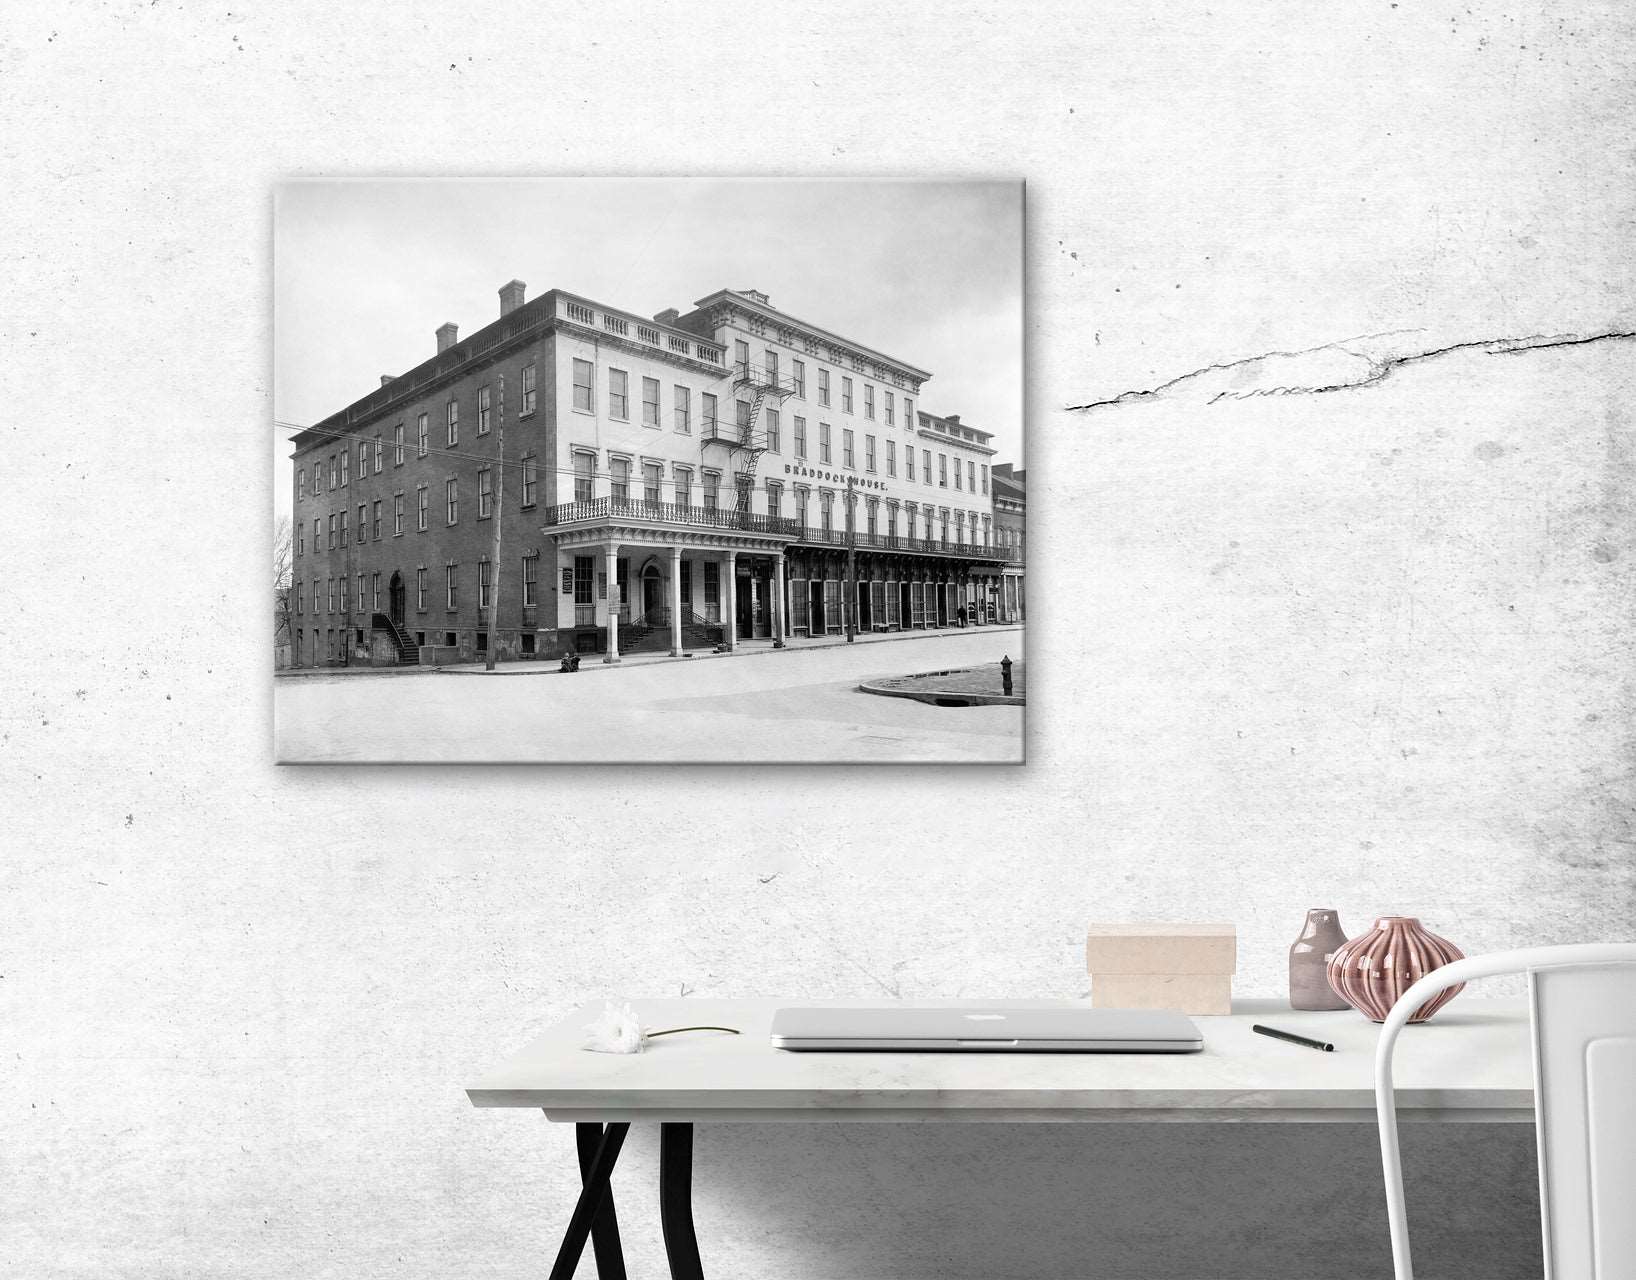 A canvas print of a vintage photograph of the Braddock House hanging on a white wall above a desk